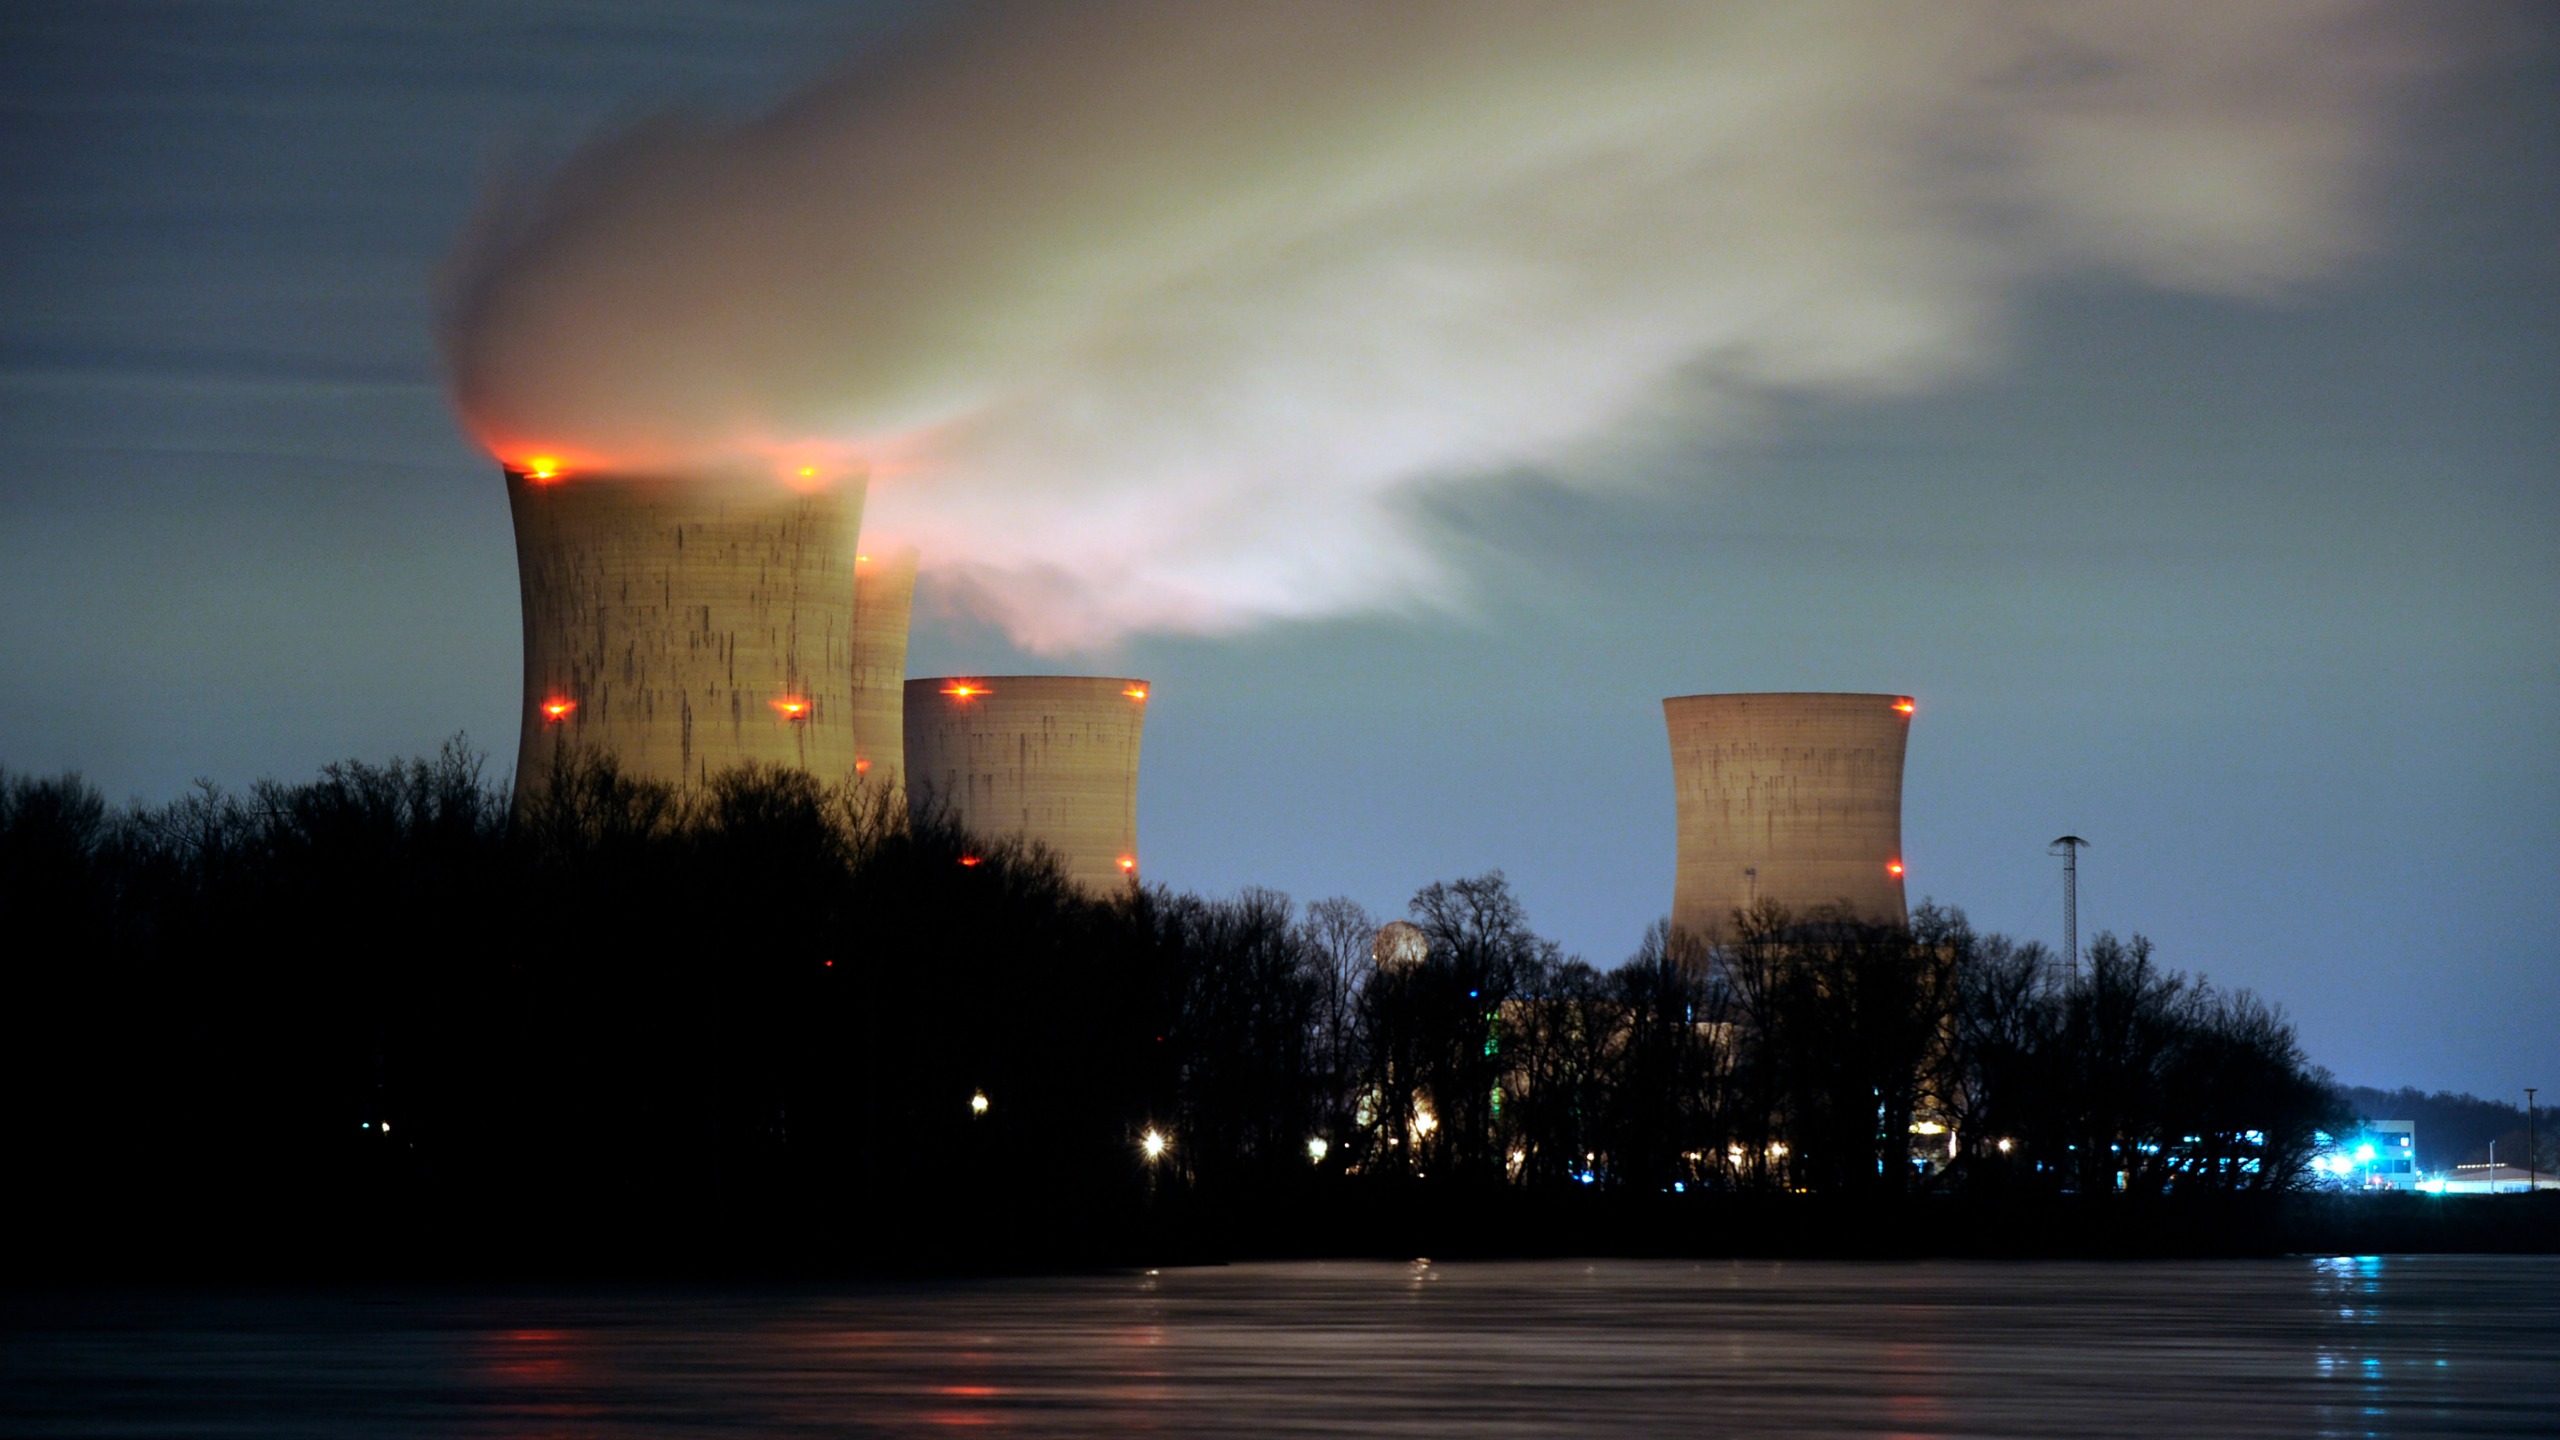 nuclear power plant, Smoke, Power plant, Cooling towers, Environment, Trees, Long exposure, Lights, Water, Evening Wallpaper